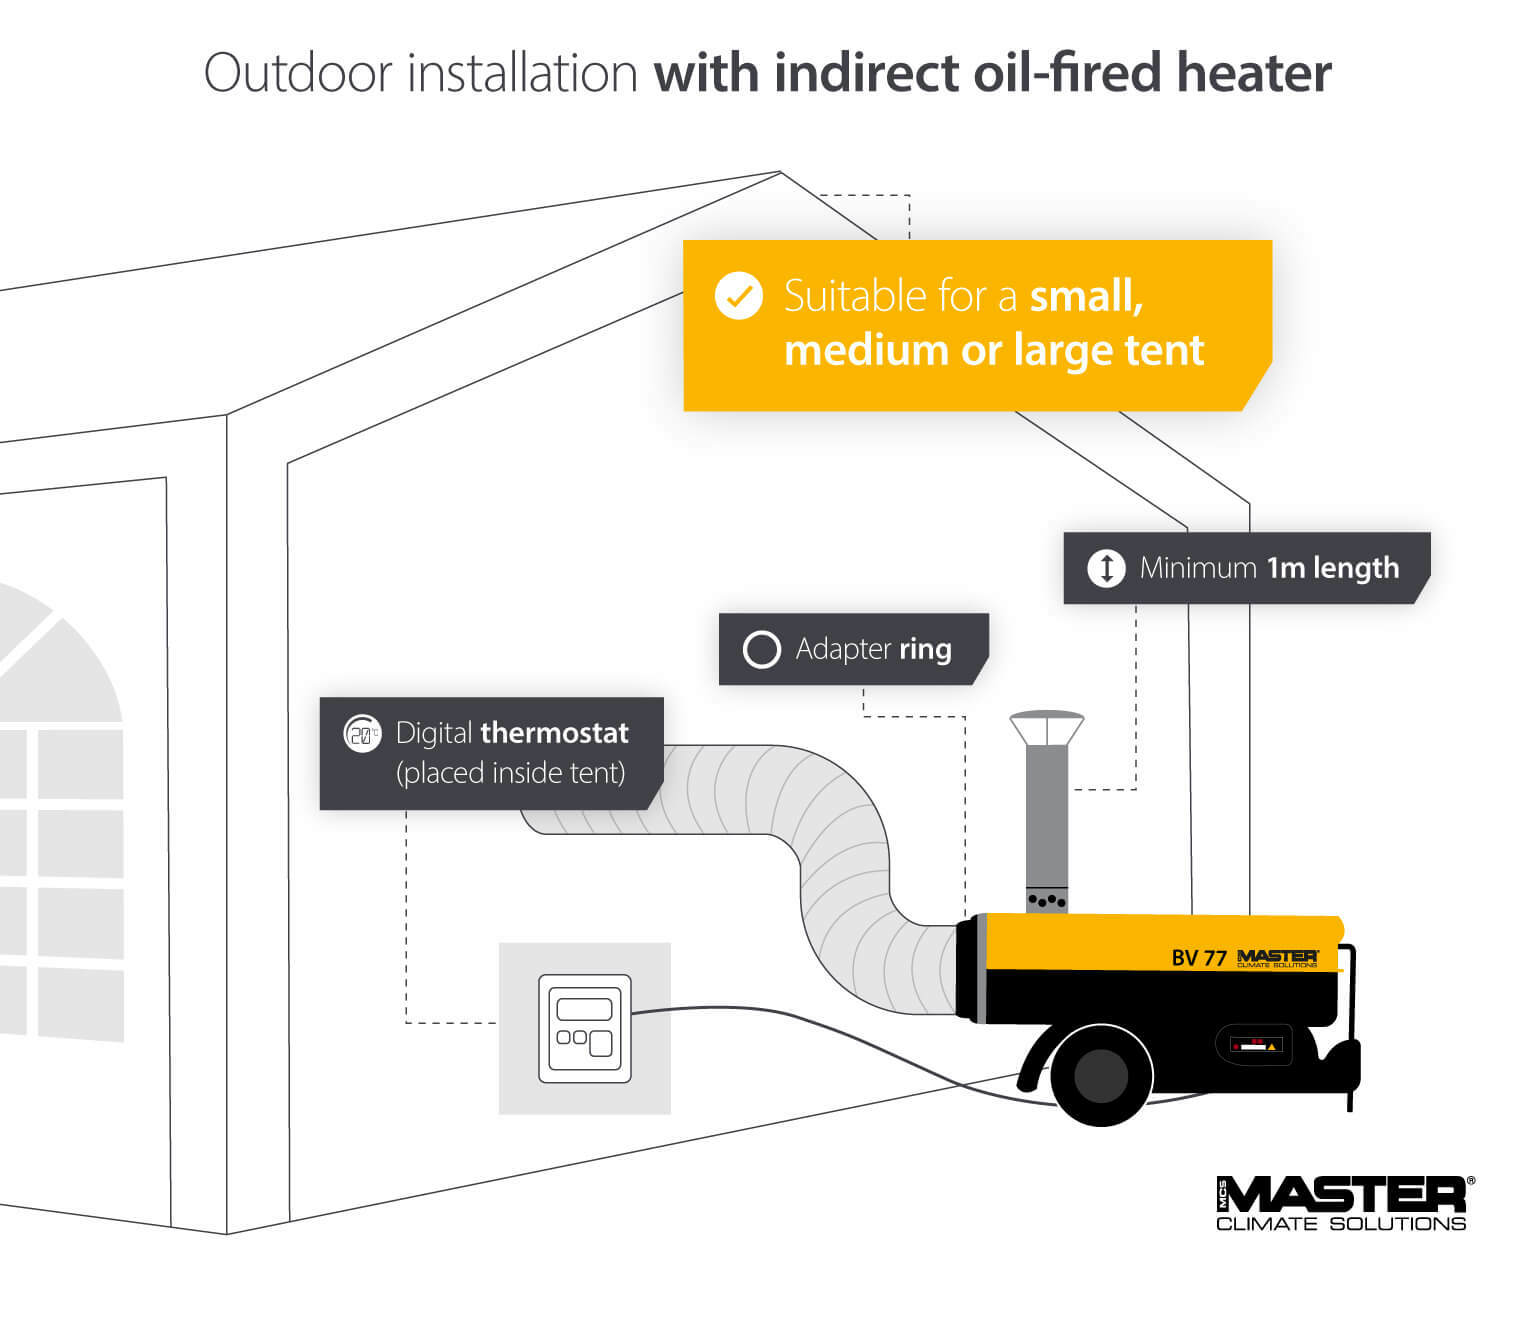 Infographic demonstrating outside installation of an Indirect Oil-fired Heater with digital thermostat for small, medium, or large tents and marquees